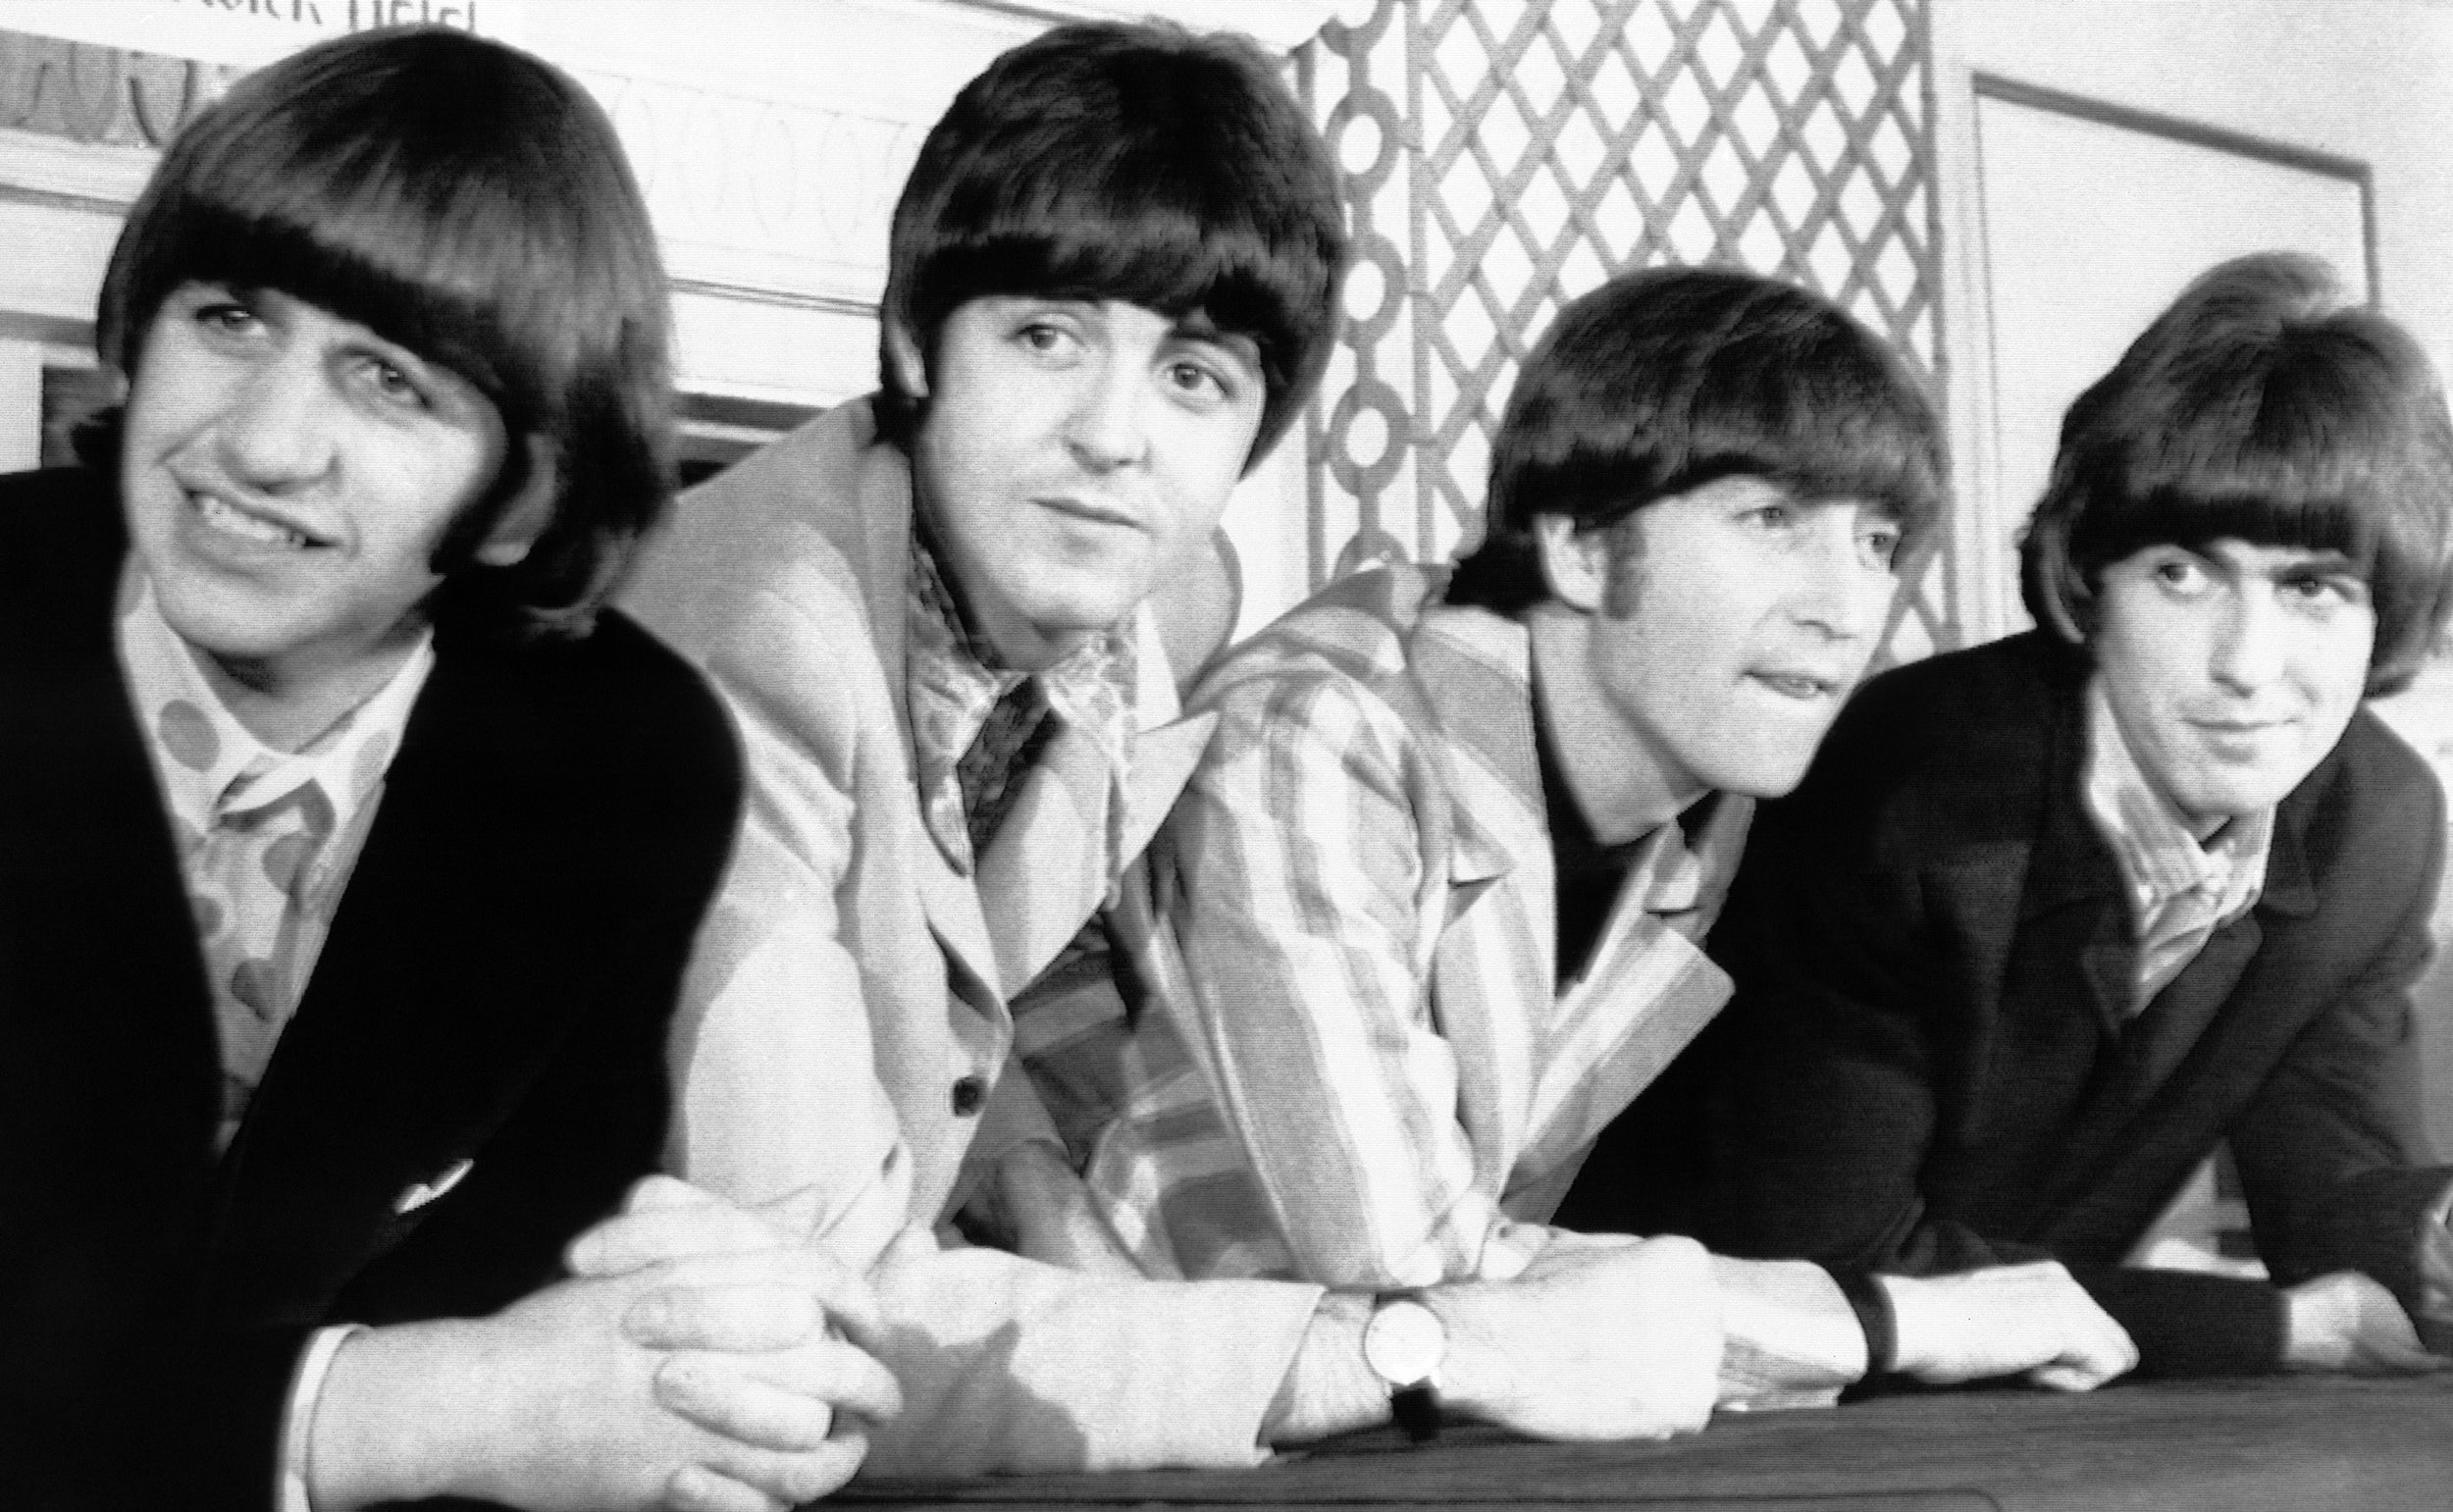 Beatles at a press conference in Auguest 1966.